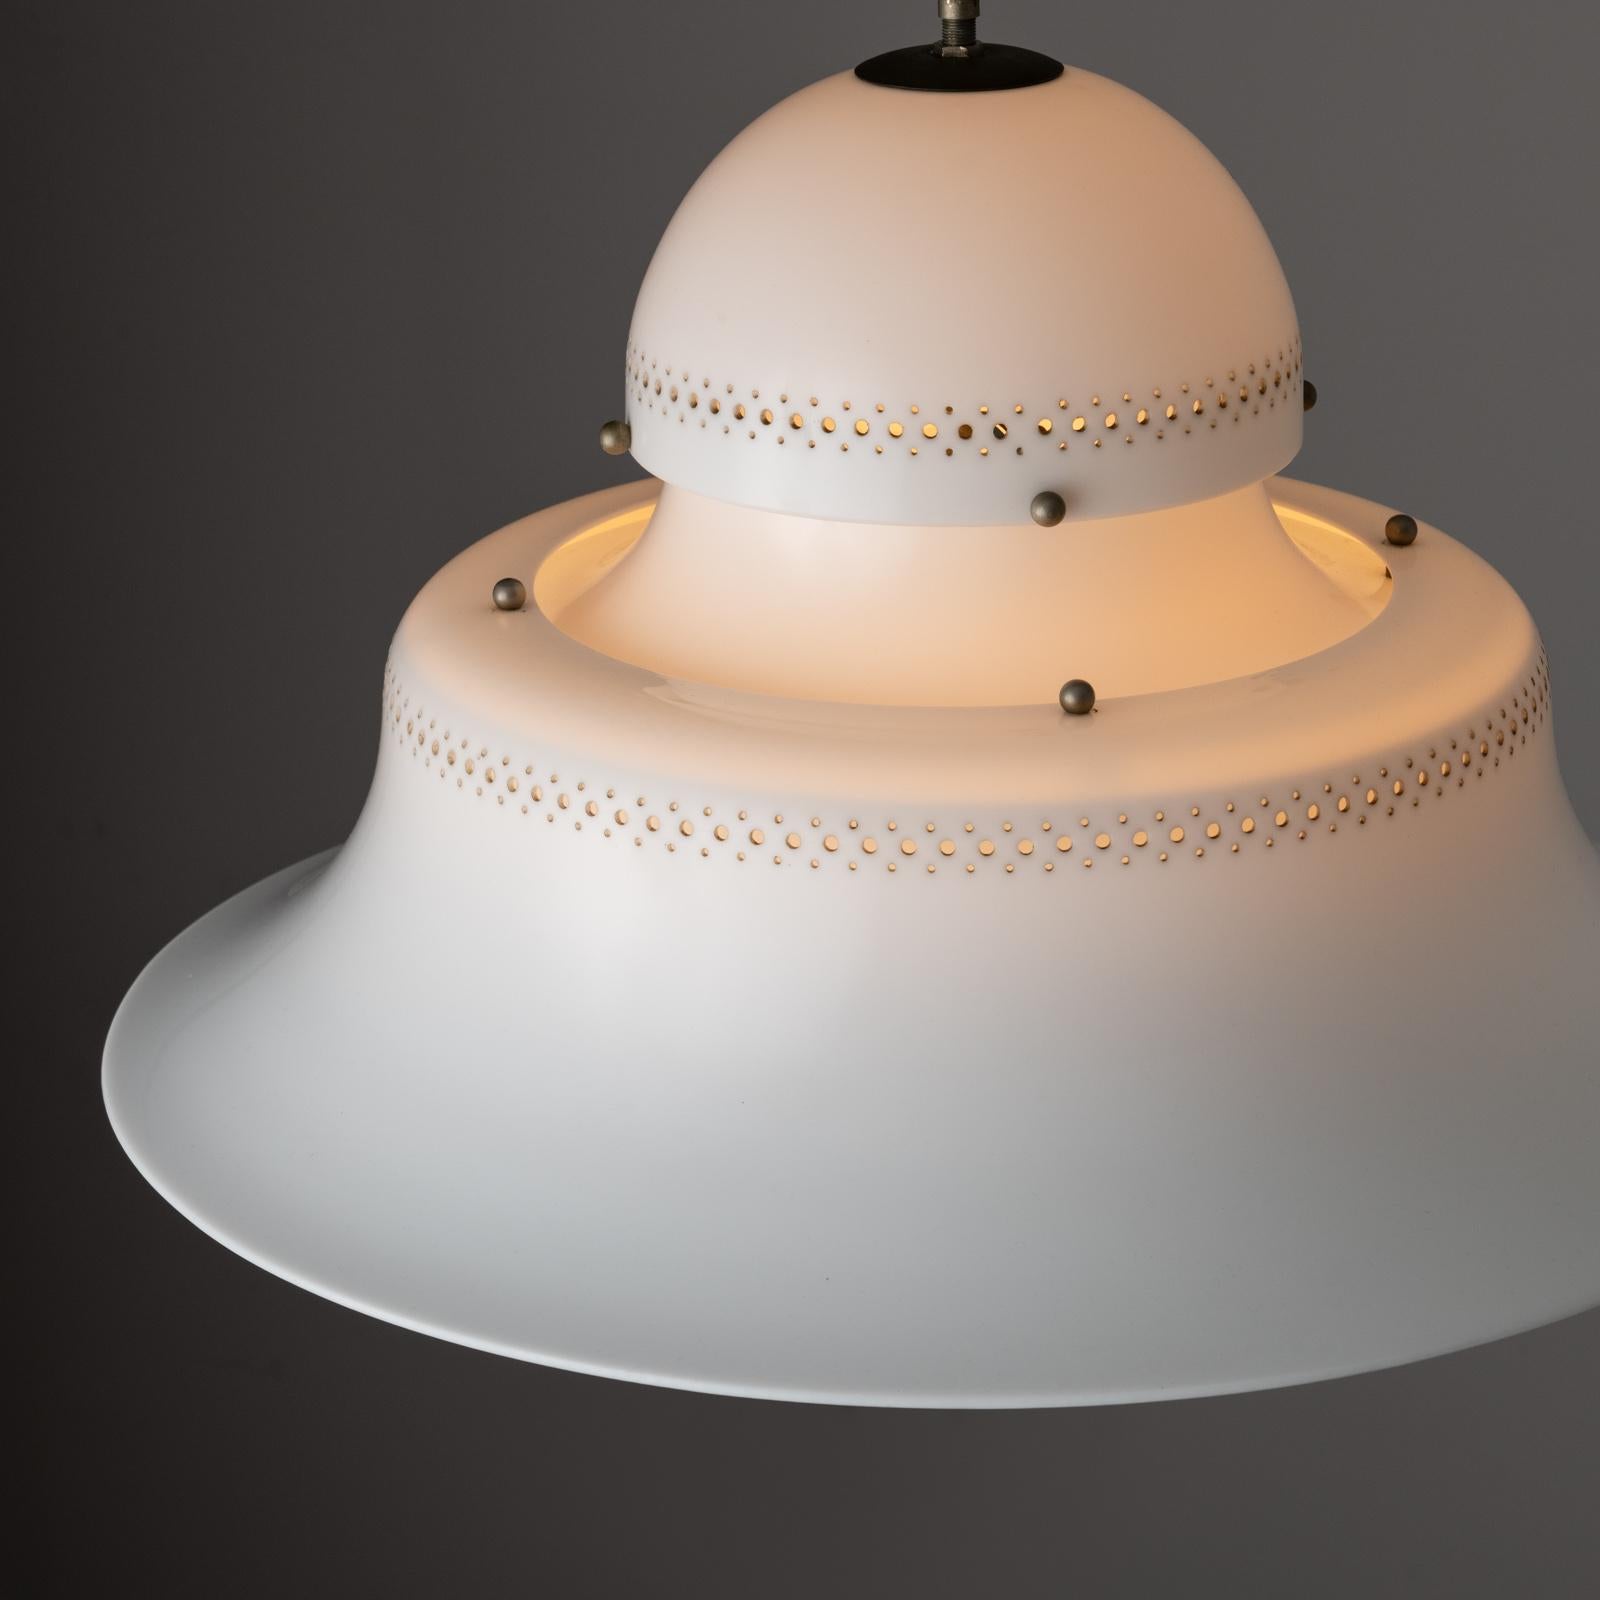 Model KD14 Ceiling Light by Sergio Asti for Kartell In Good Condition For Sale In Los Angeles, CA